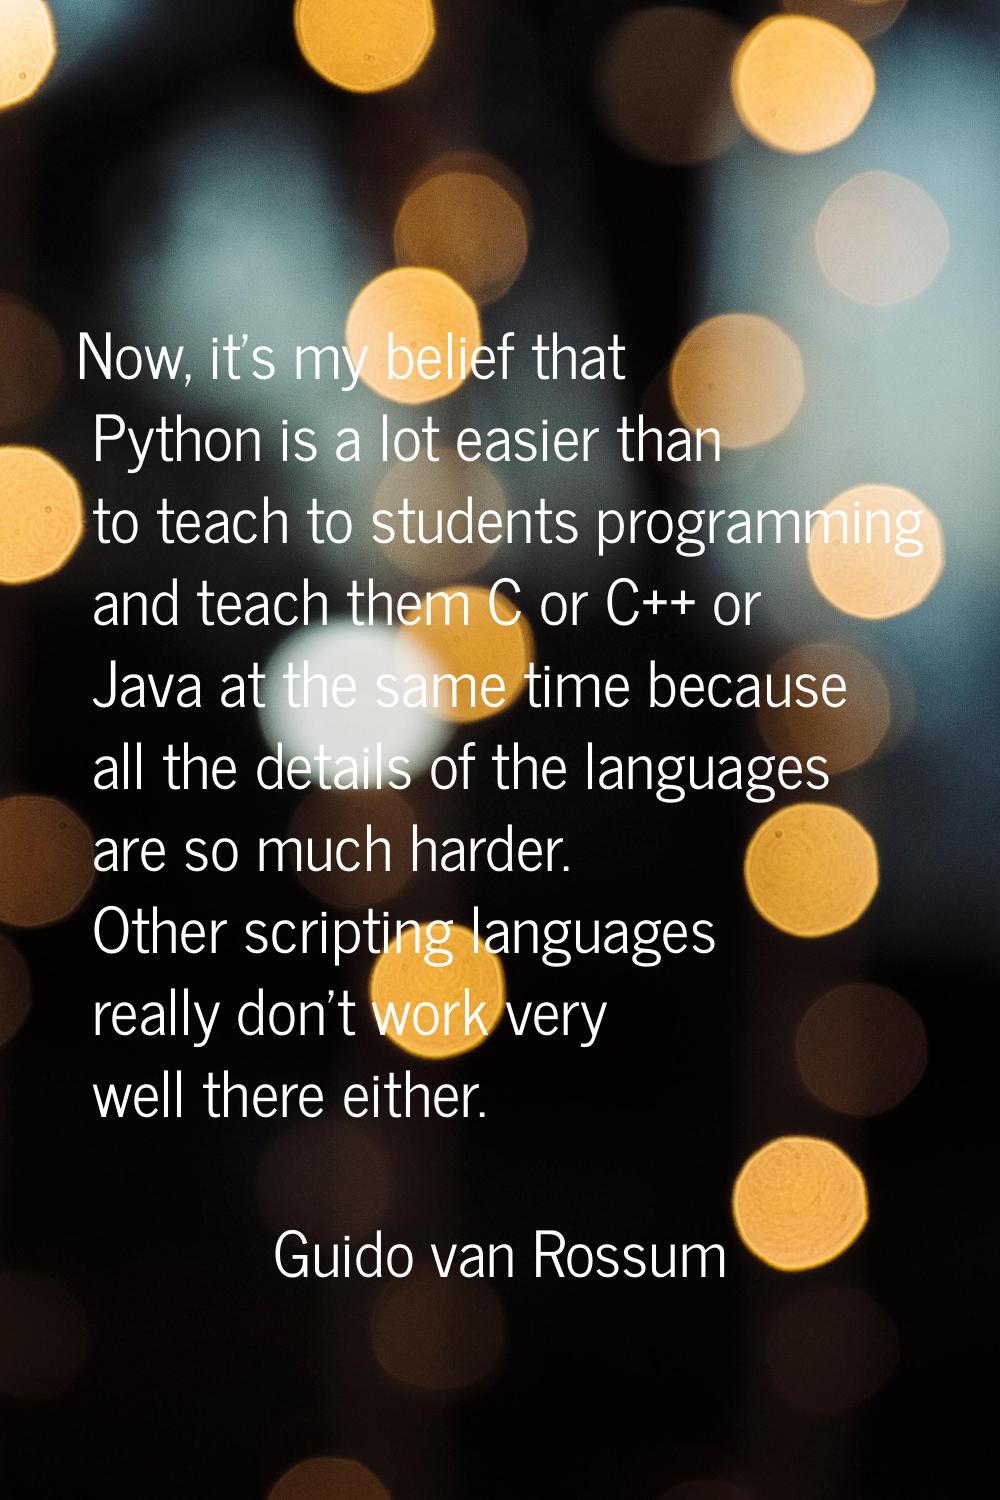 Now, it's my belief that Python is a lot easier than to teach to students programming and teach the